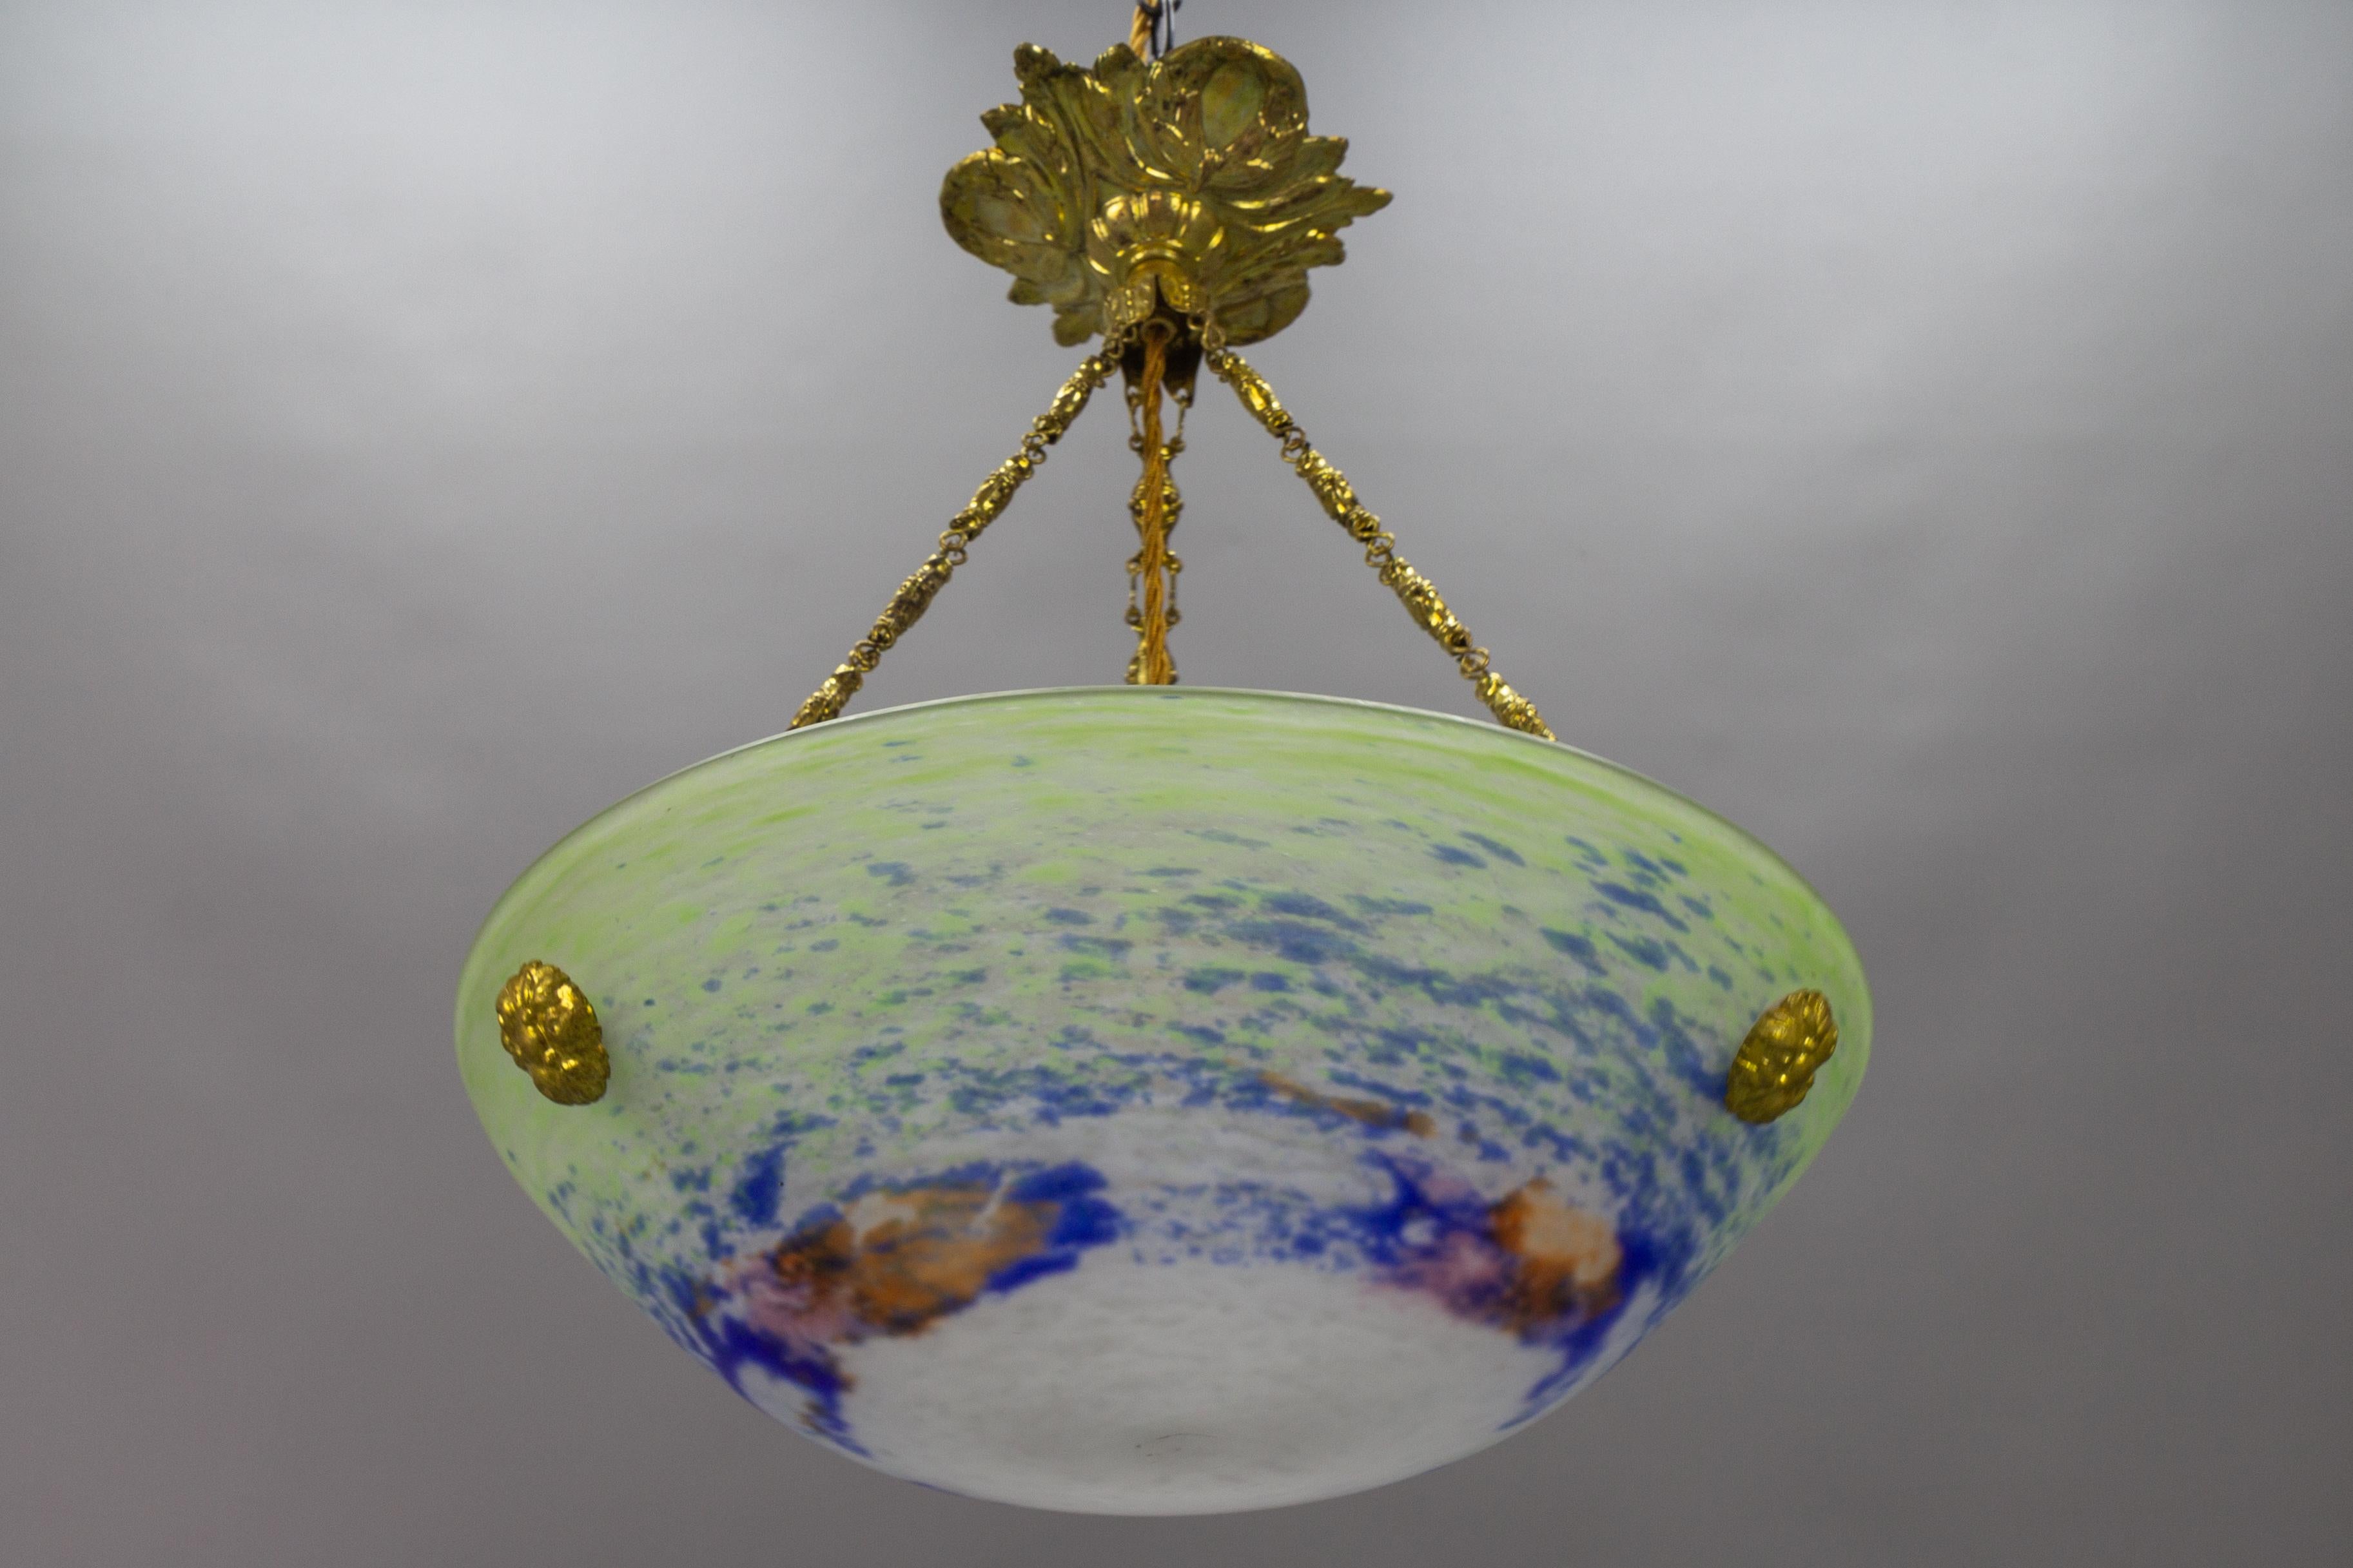 French Art Nouveau Green, Blue and White Glass and Brass Pendant Light, 1920s For Sale 4